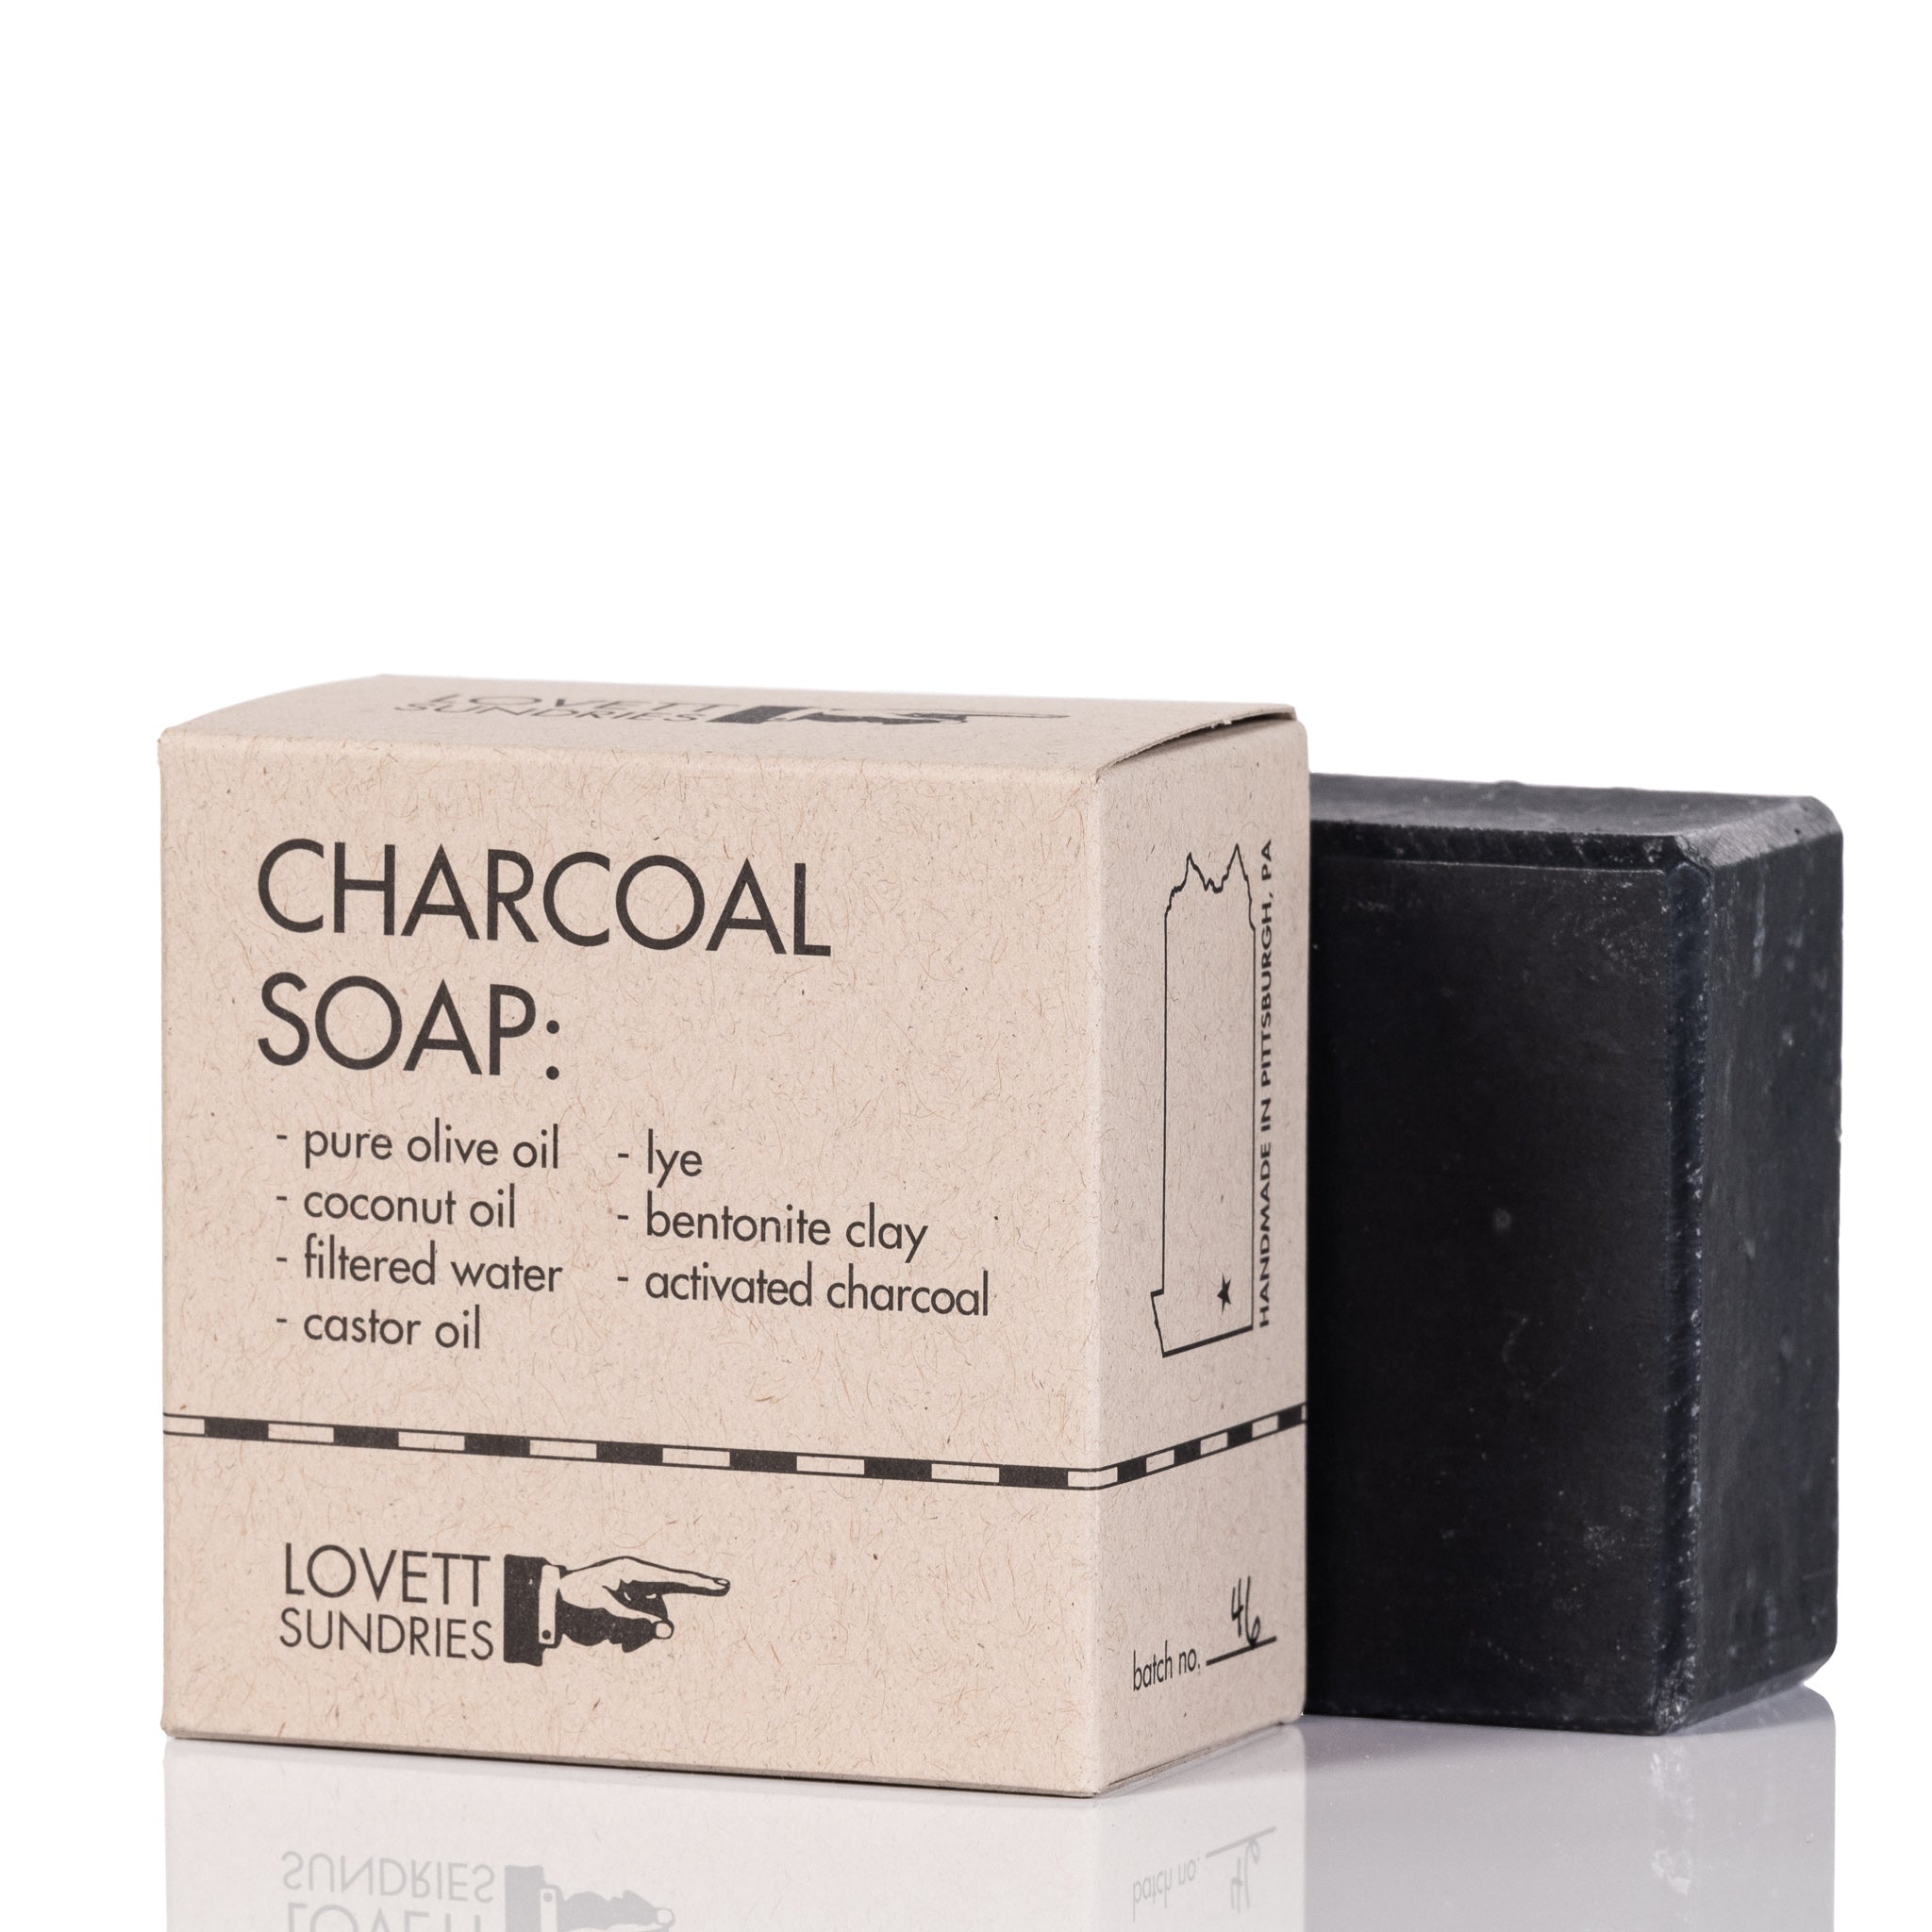 a package with a charcoal soap bar in it.